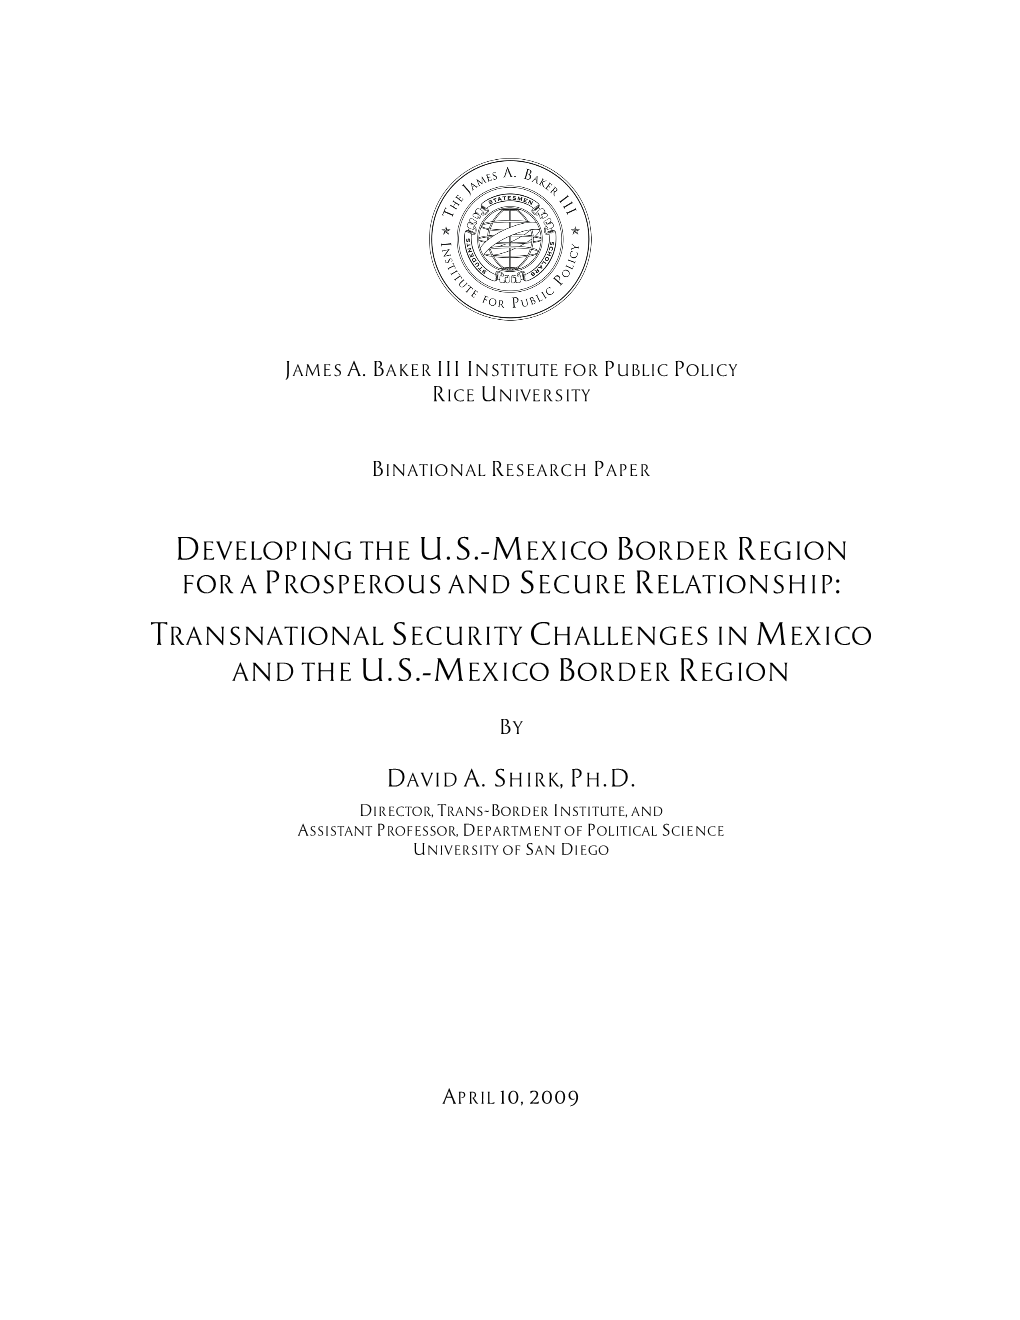 Transnational Security Challenges in Mexico and the U.S.-Mexico Border Region